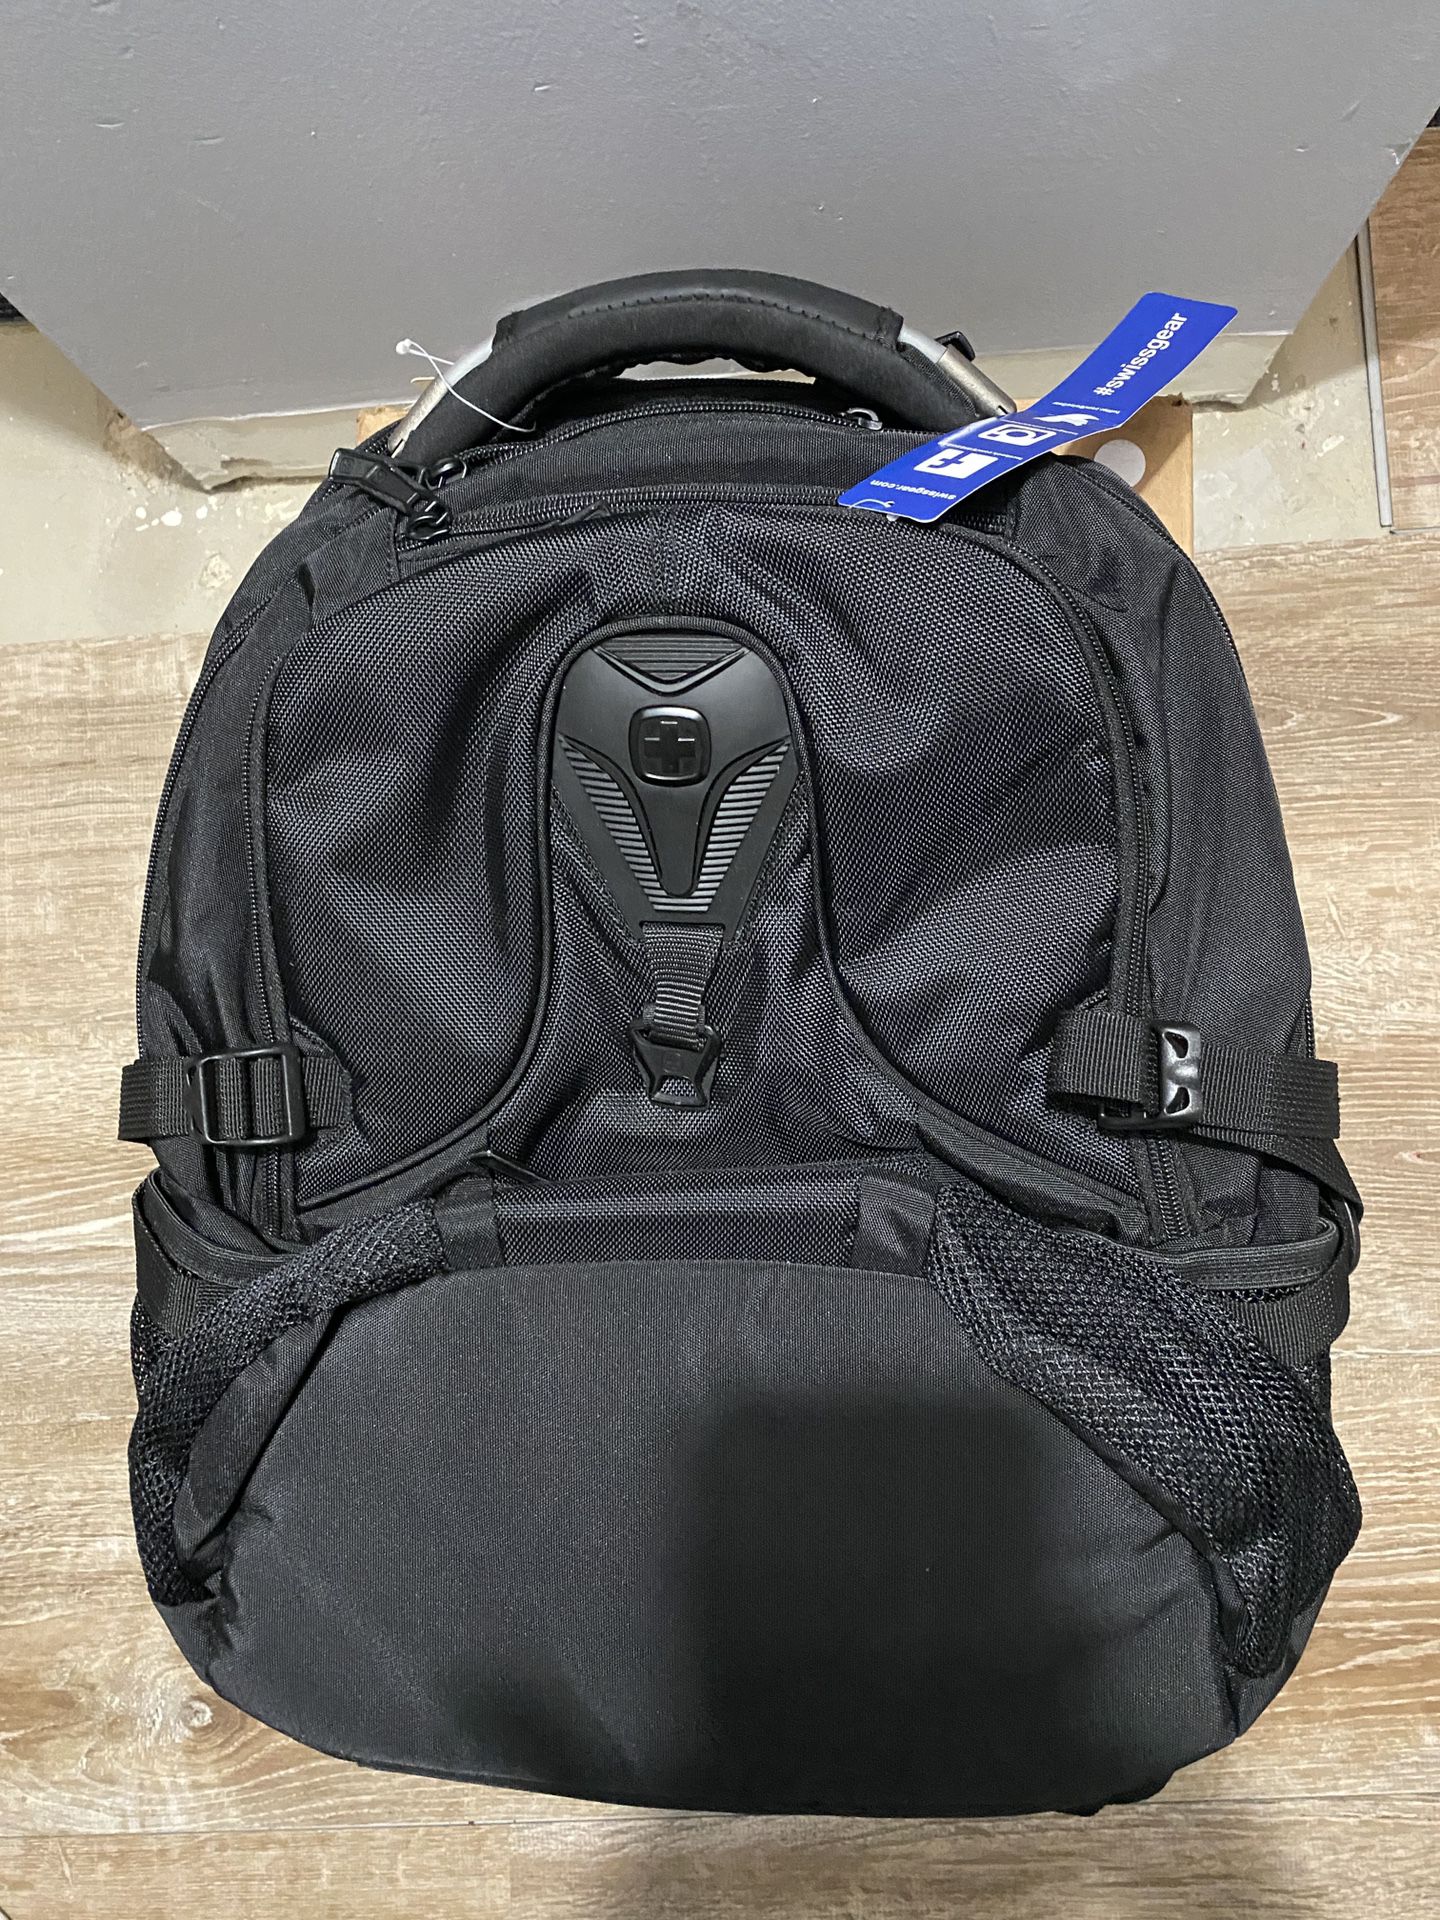 Swiss Gear Laptop Backpack New With Tags